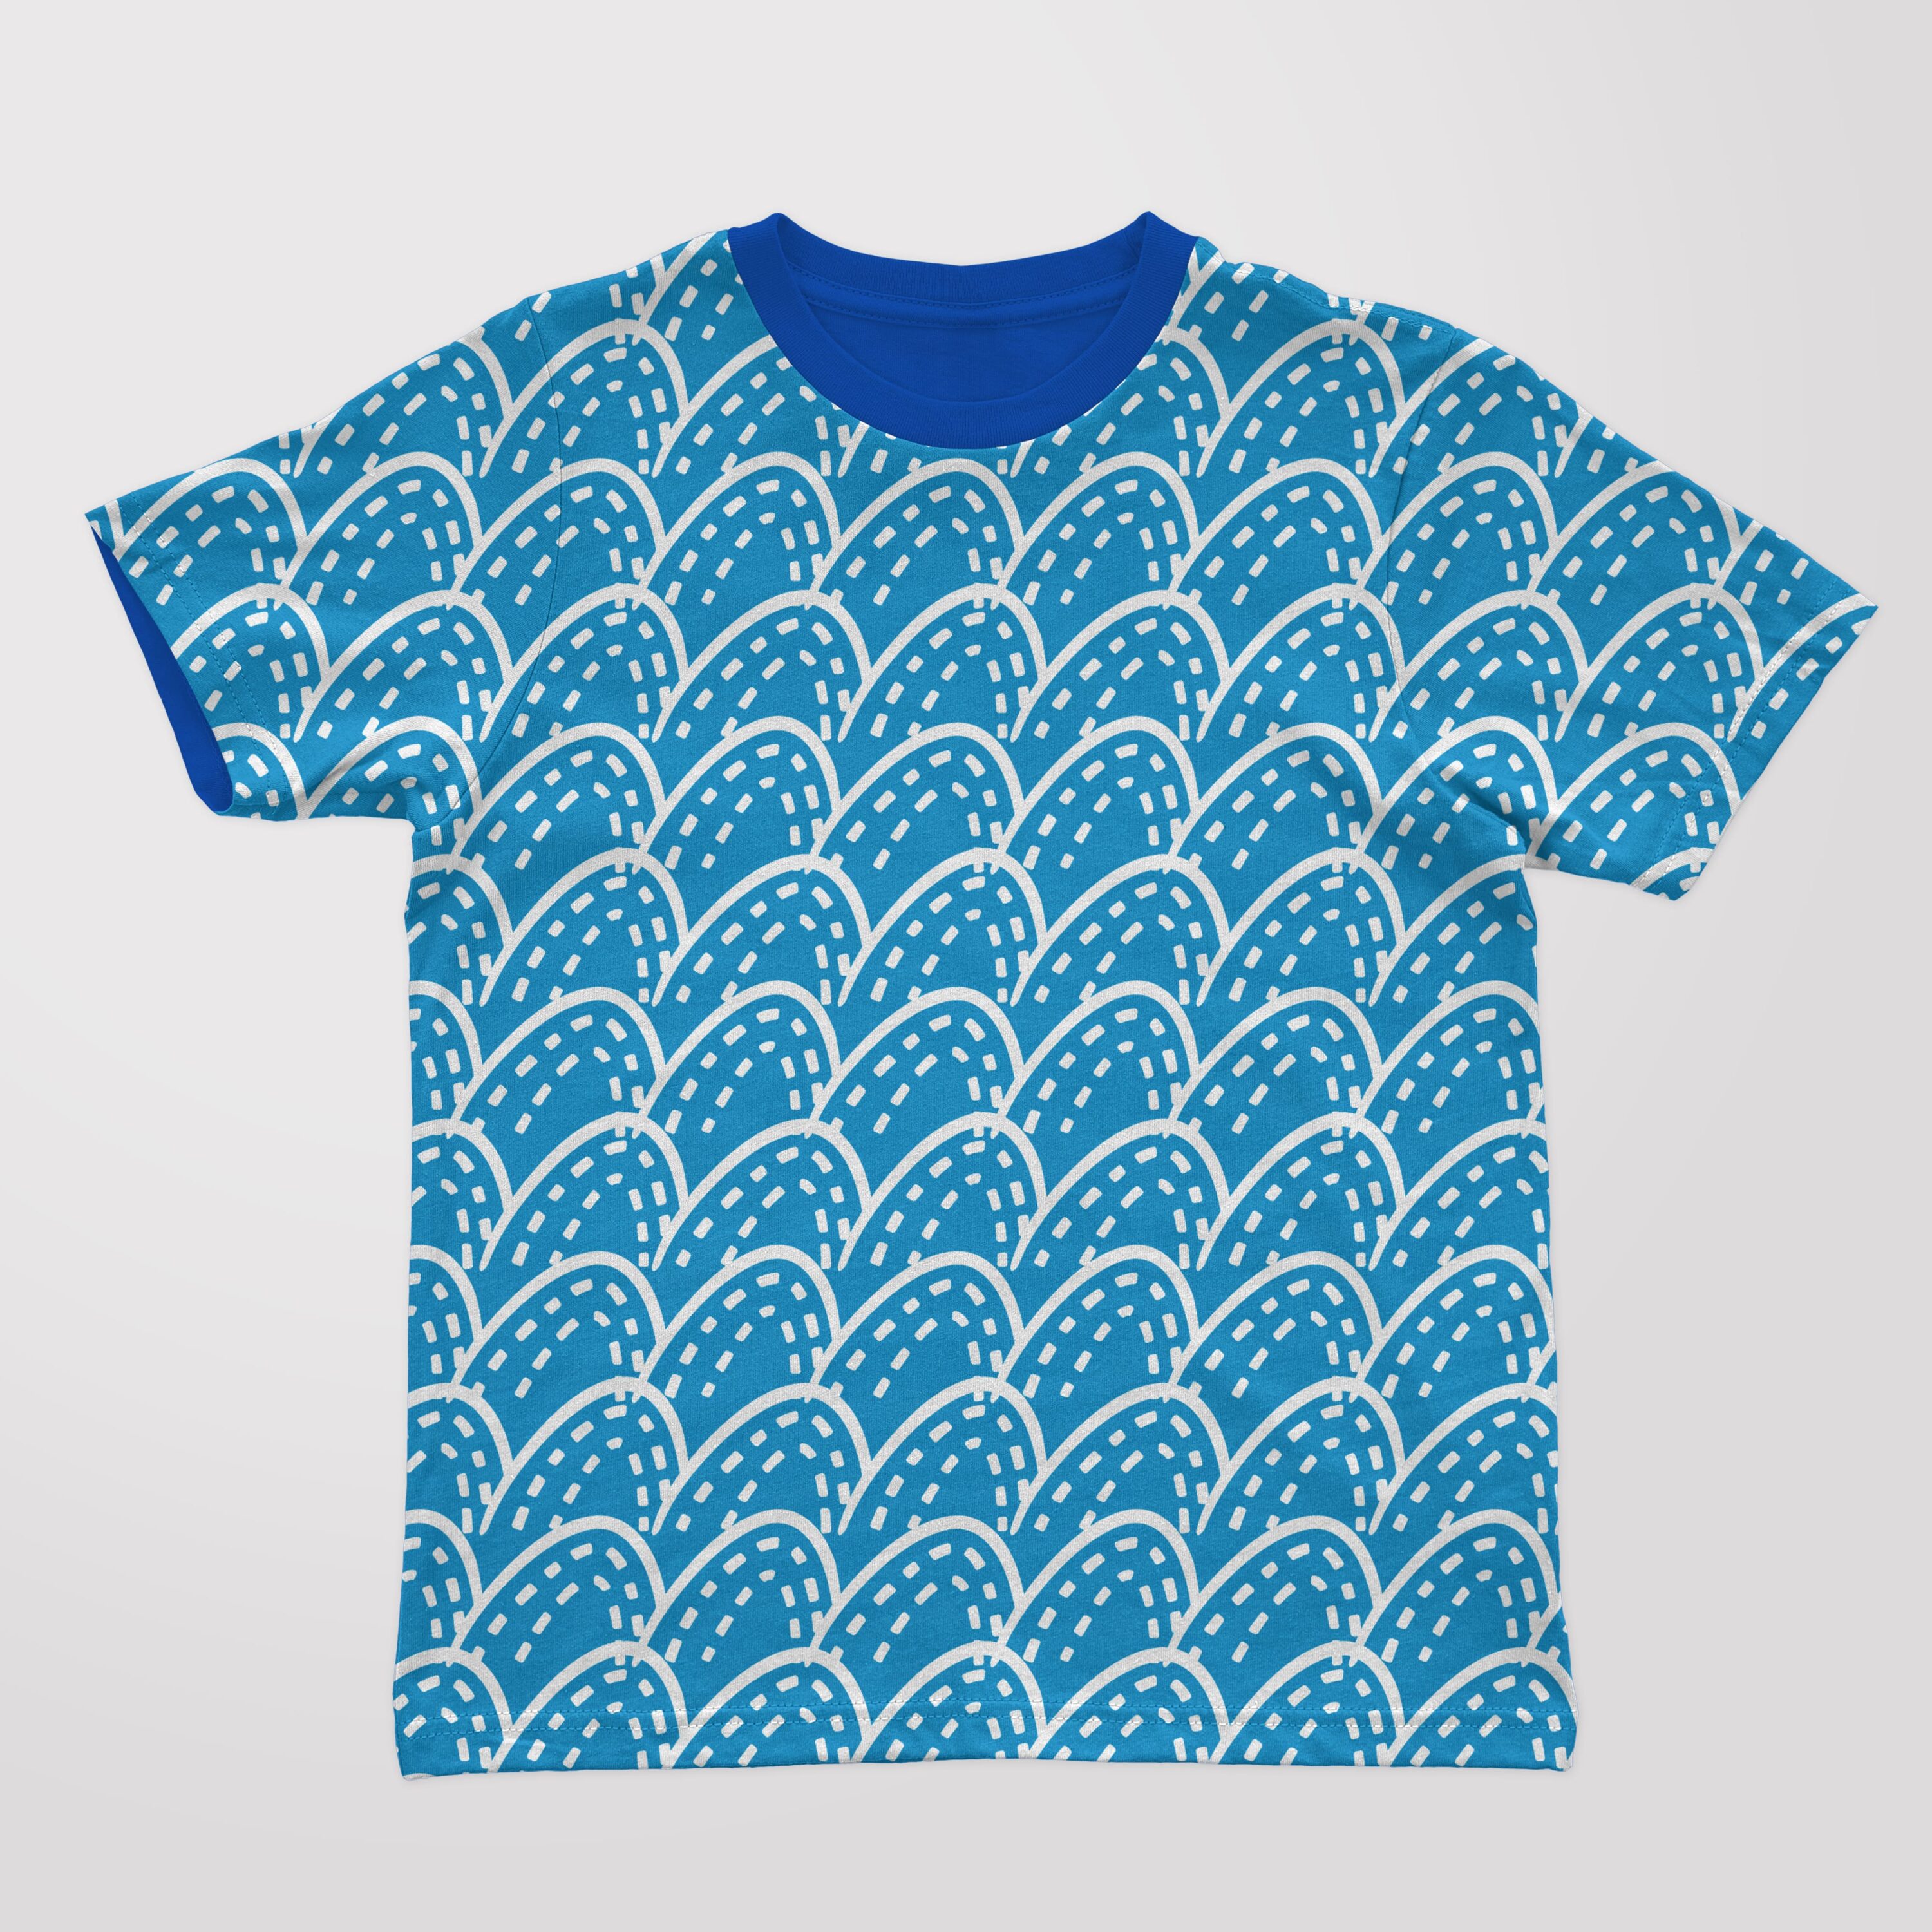 Stylish blue t-shirt with the scales.